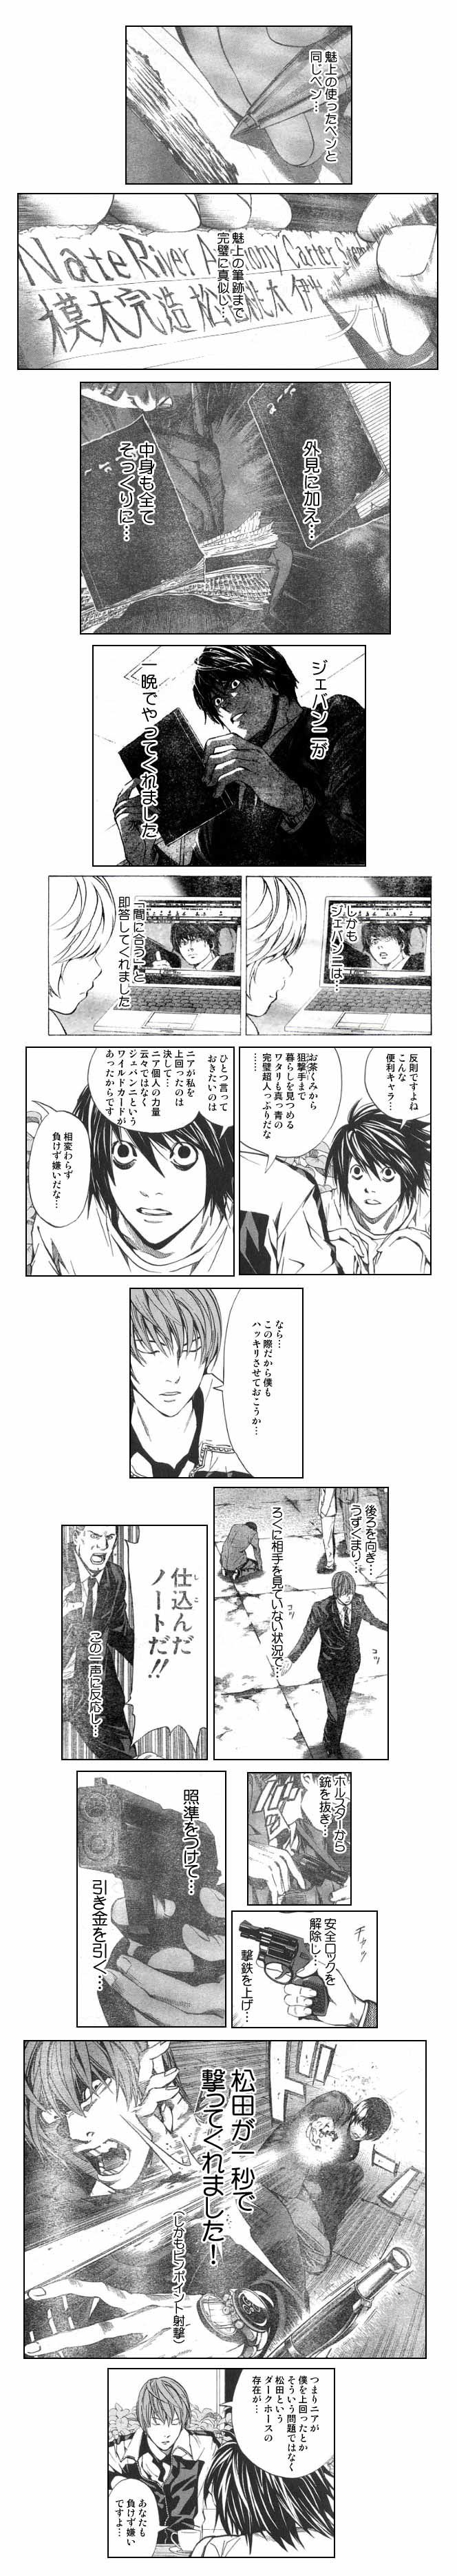 [Death note] got it from such a favorable situation why you lost. 1